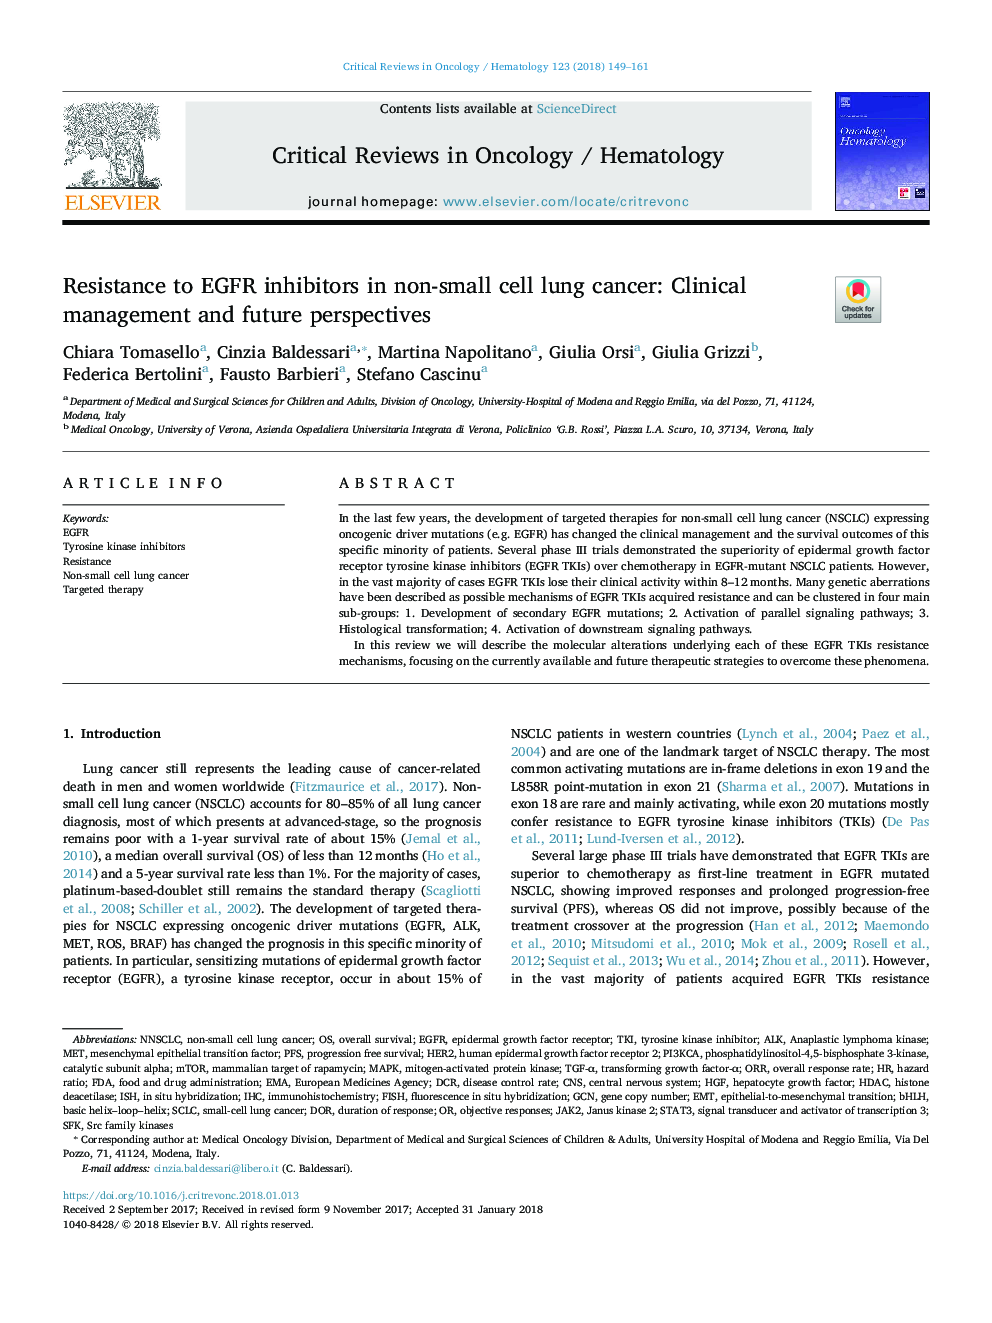 Resistance to EGFR inhibitors in non-small cell lung cancer: Clinical management and future perspectives